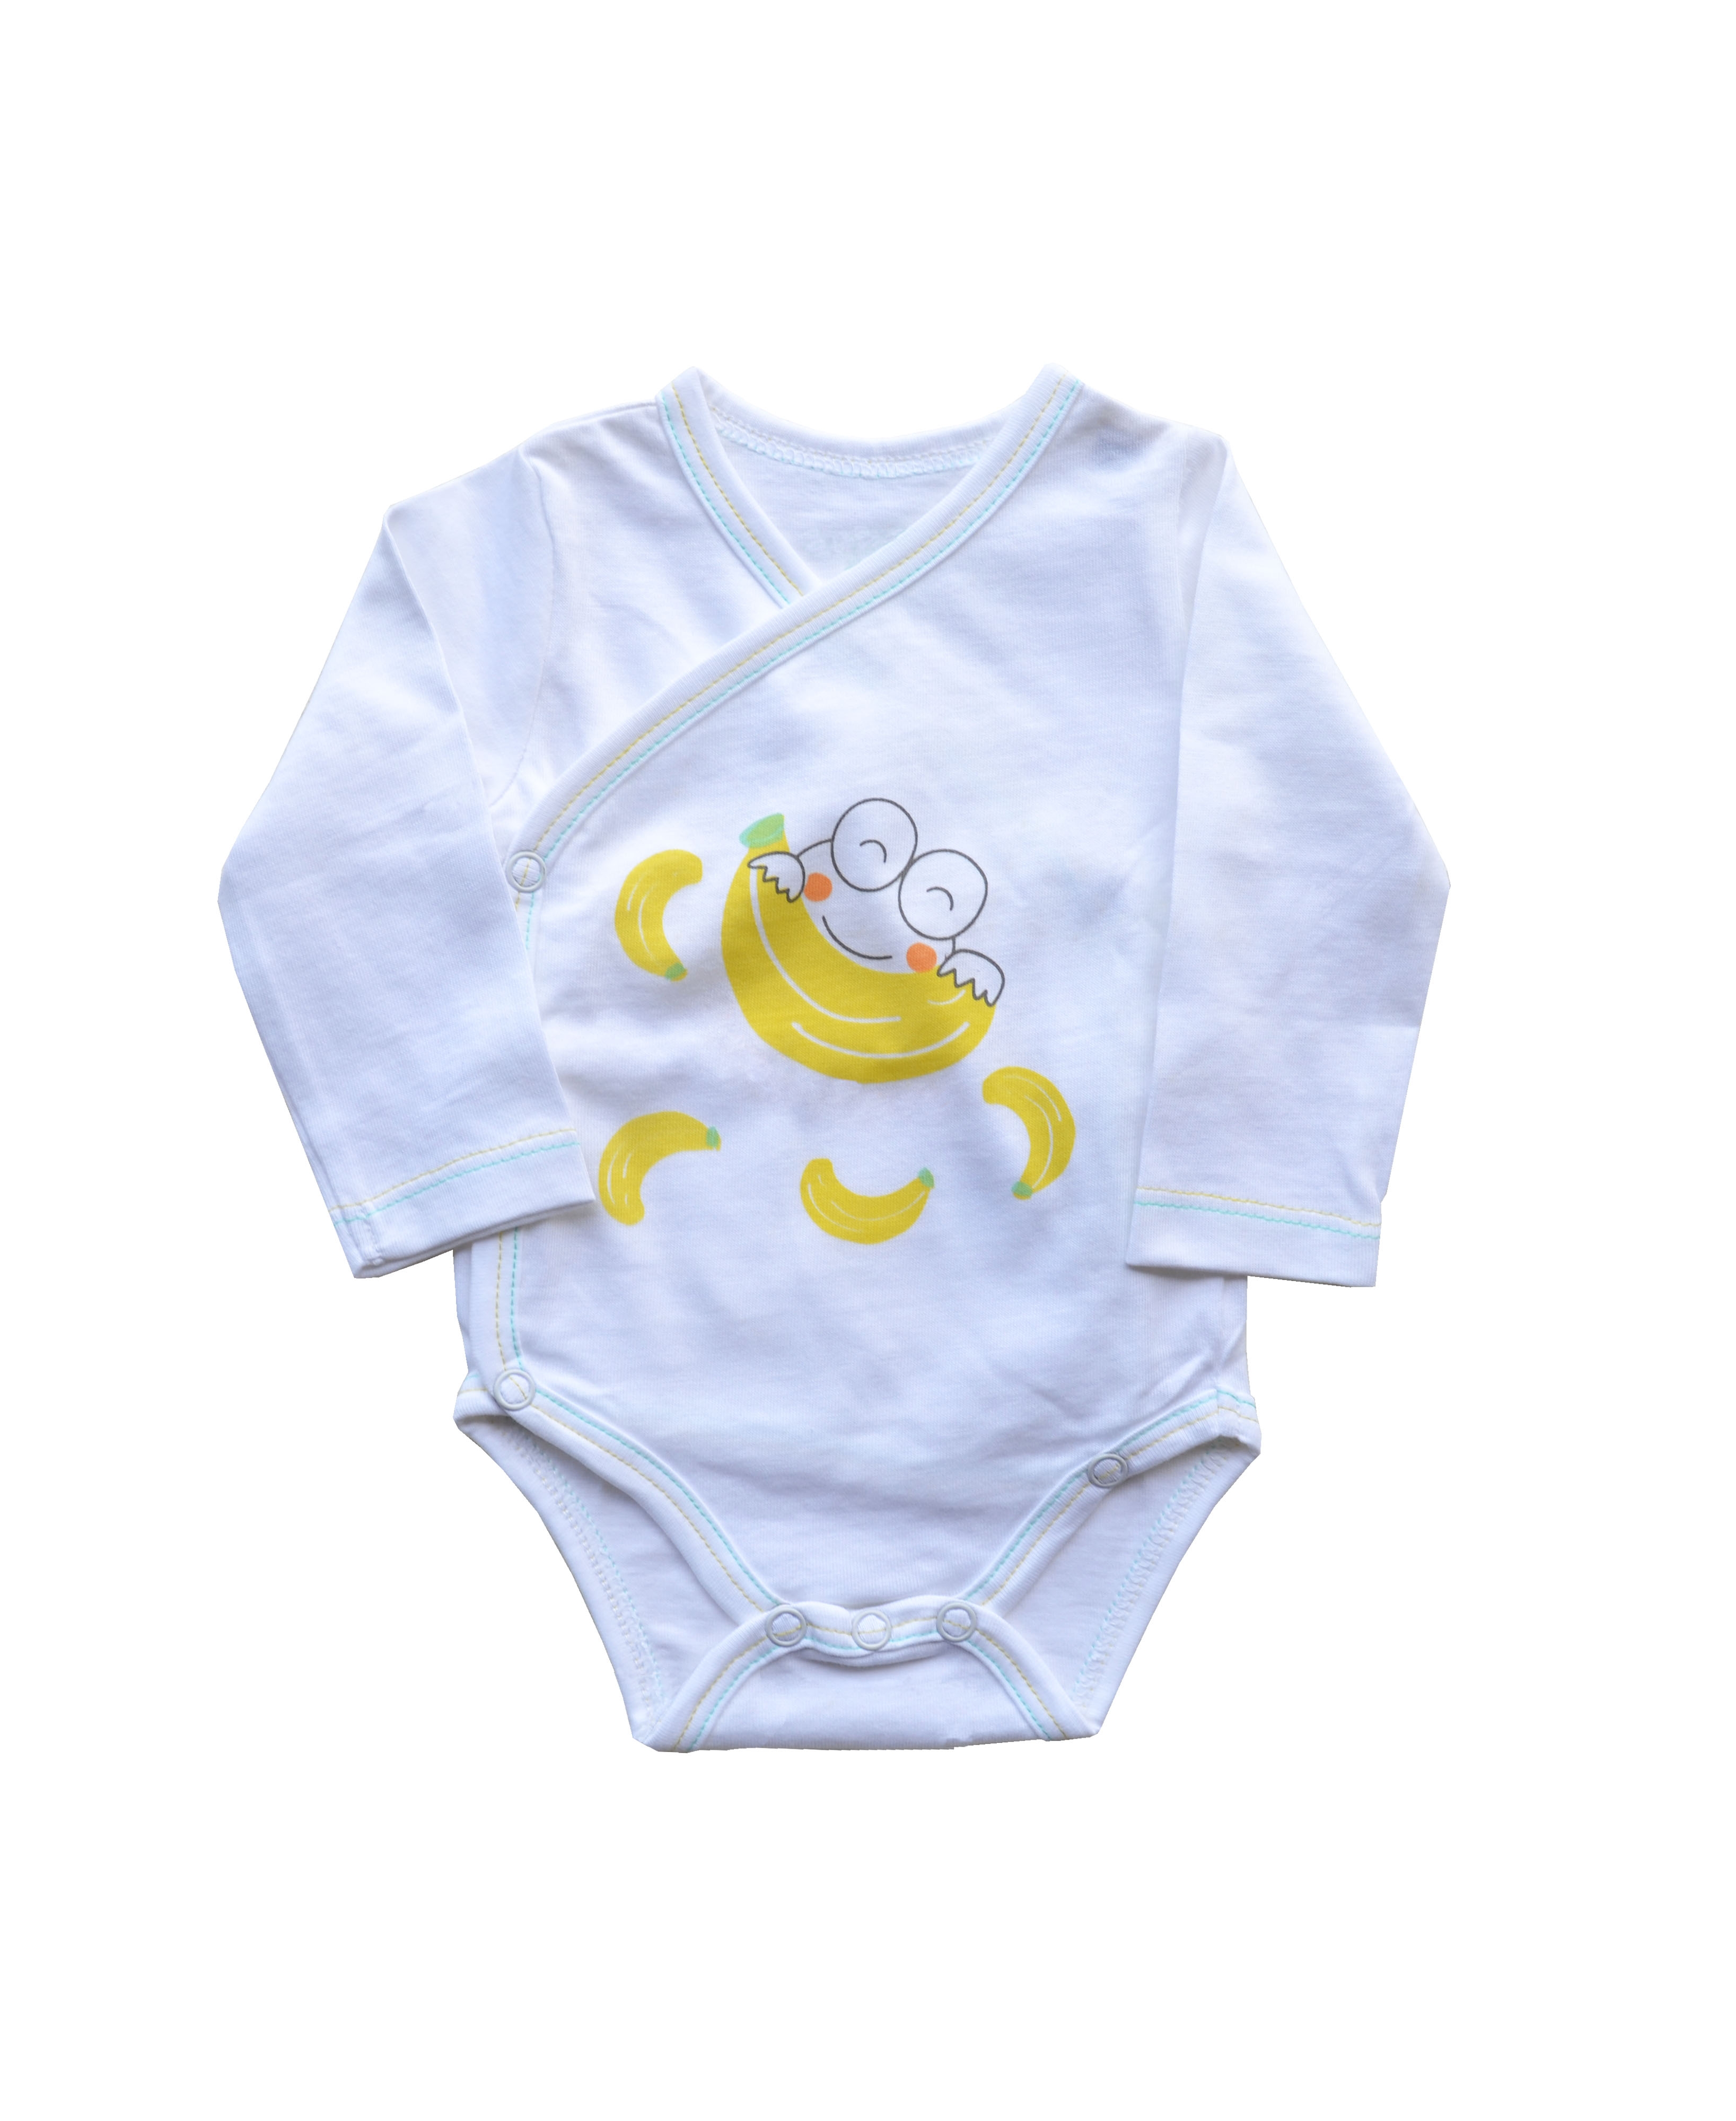 White Long Sleeve Rompers/Onesie with Banana Print on Chest  (100% Cotton Single Jersey)